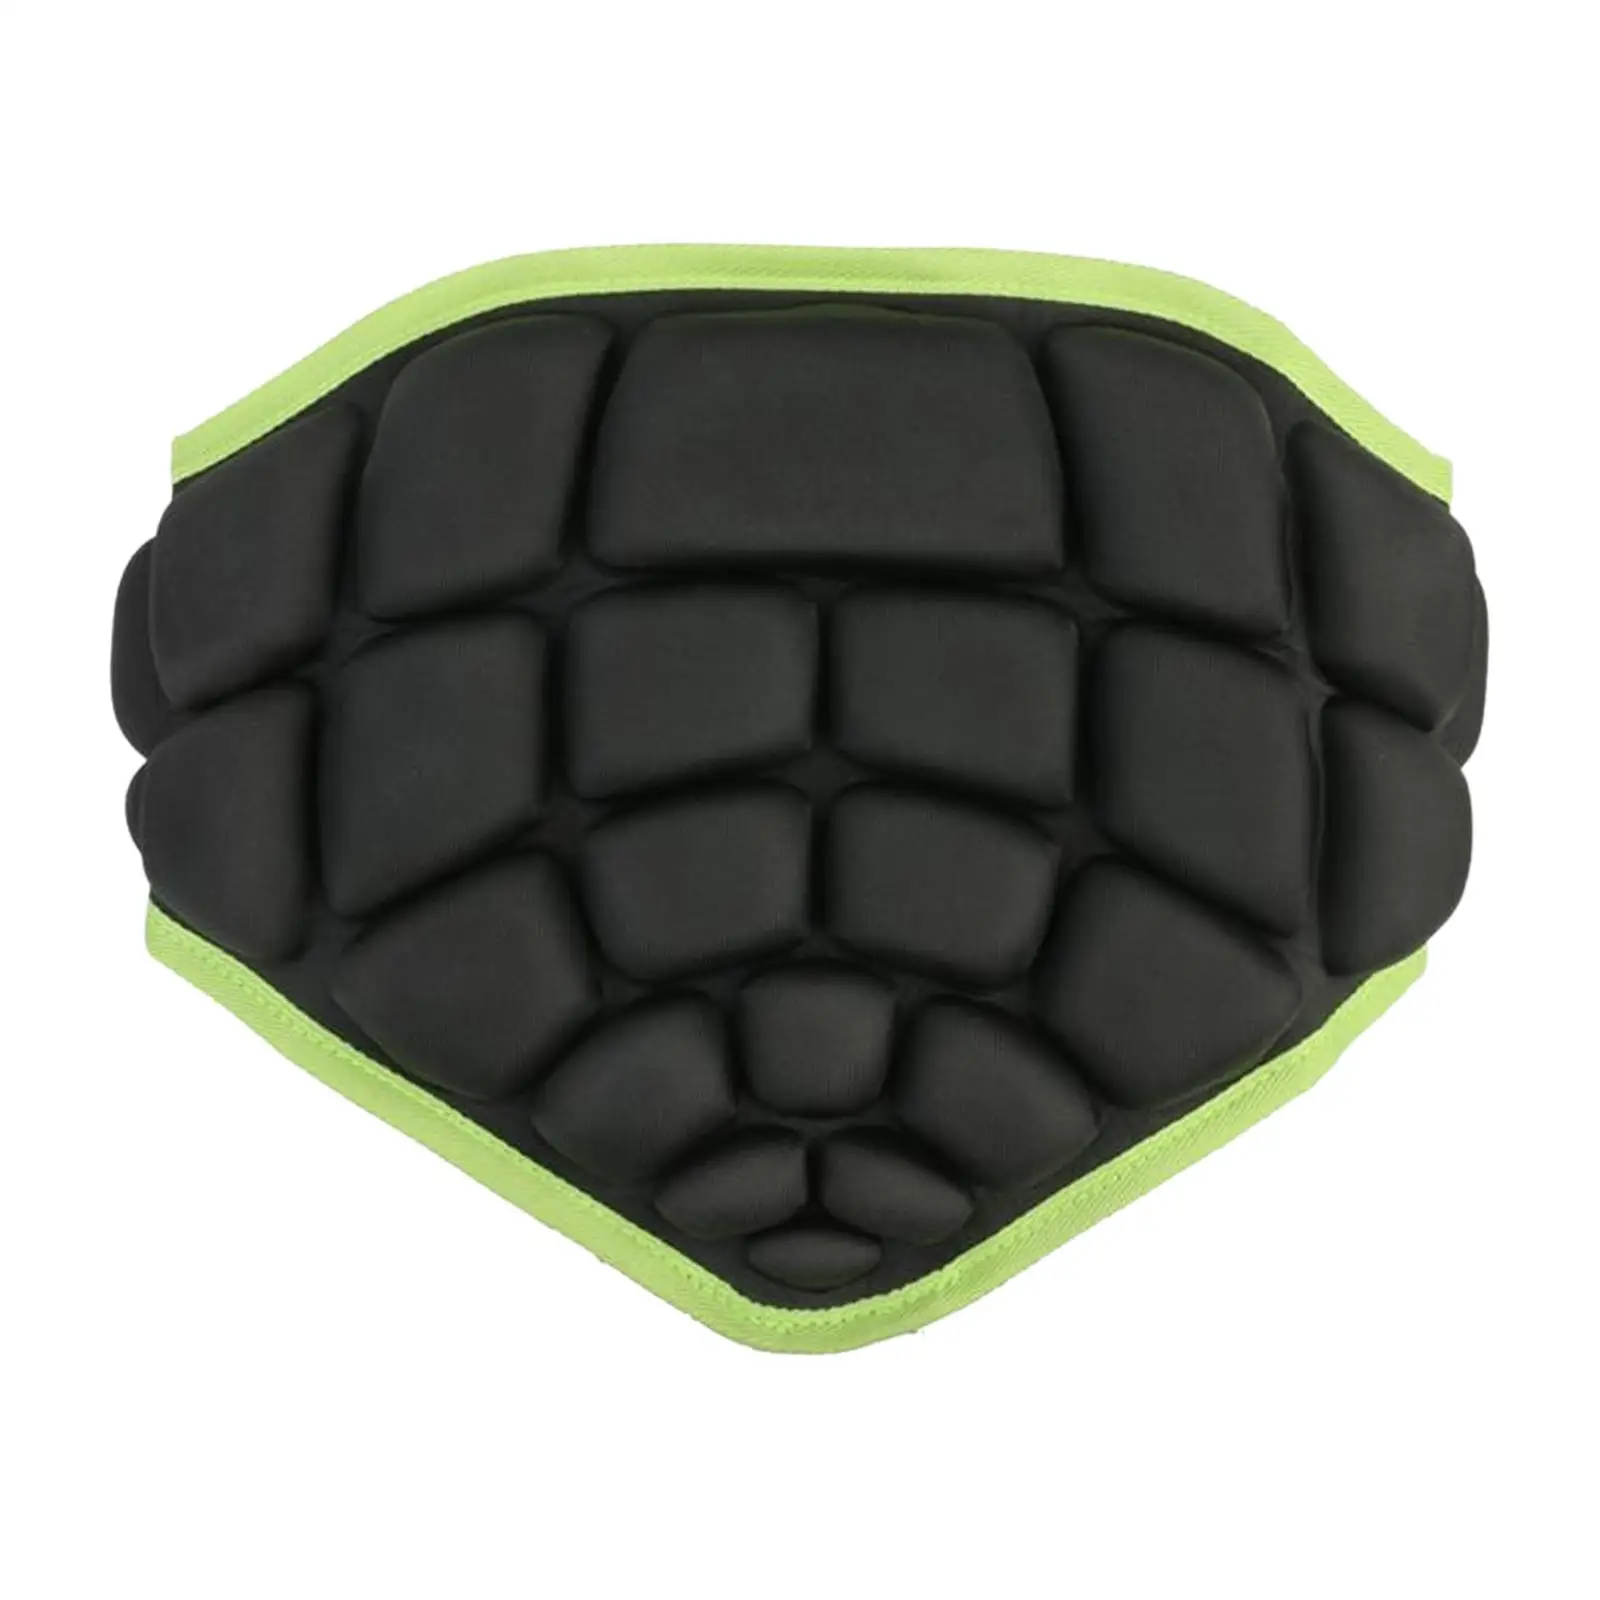 Hip Guard Pad Impact Protection Compression Lightweight Adjustable for Youth, Skiing